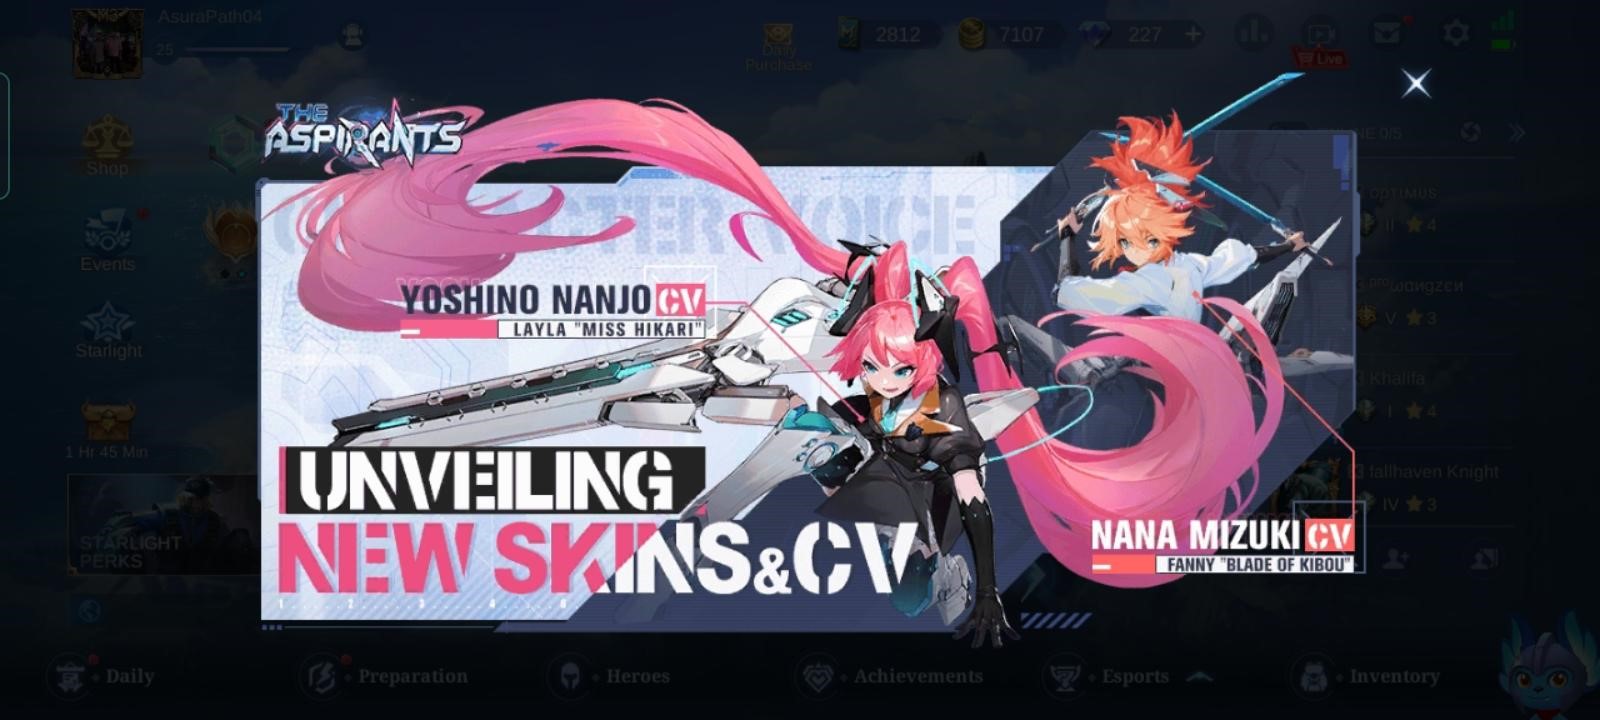 Mobile Legends Bang Bang releases its first-ever anime-themed skins titled 